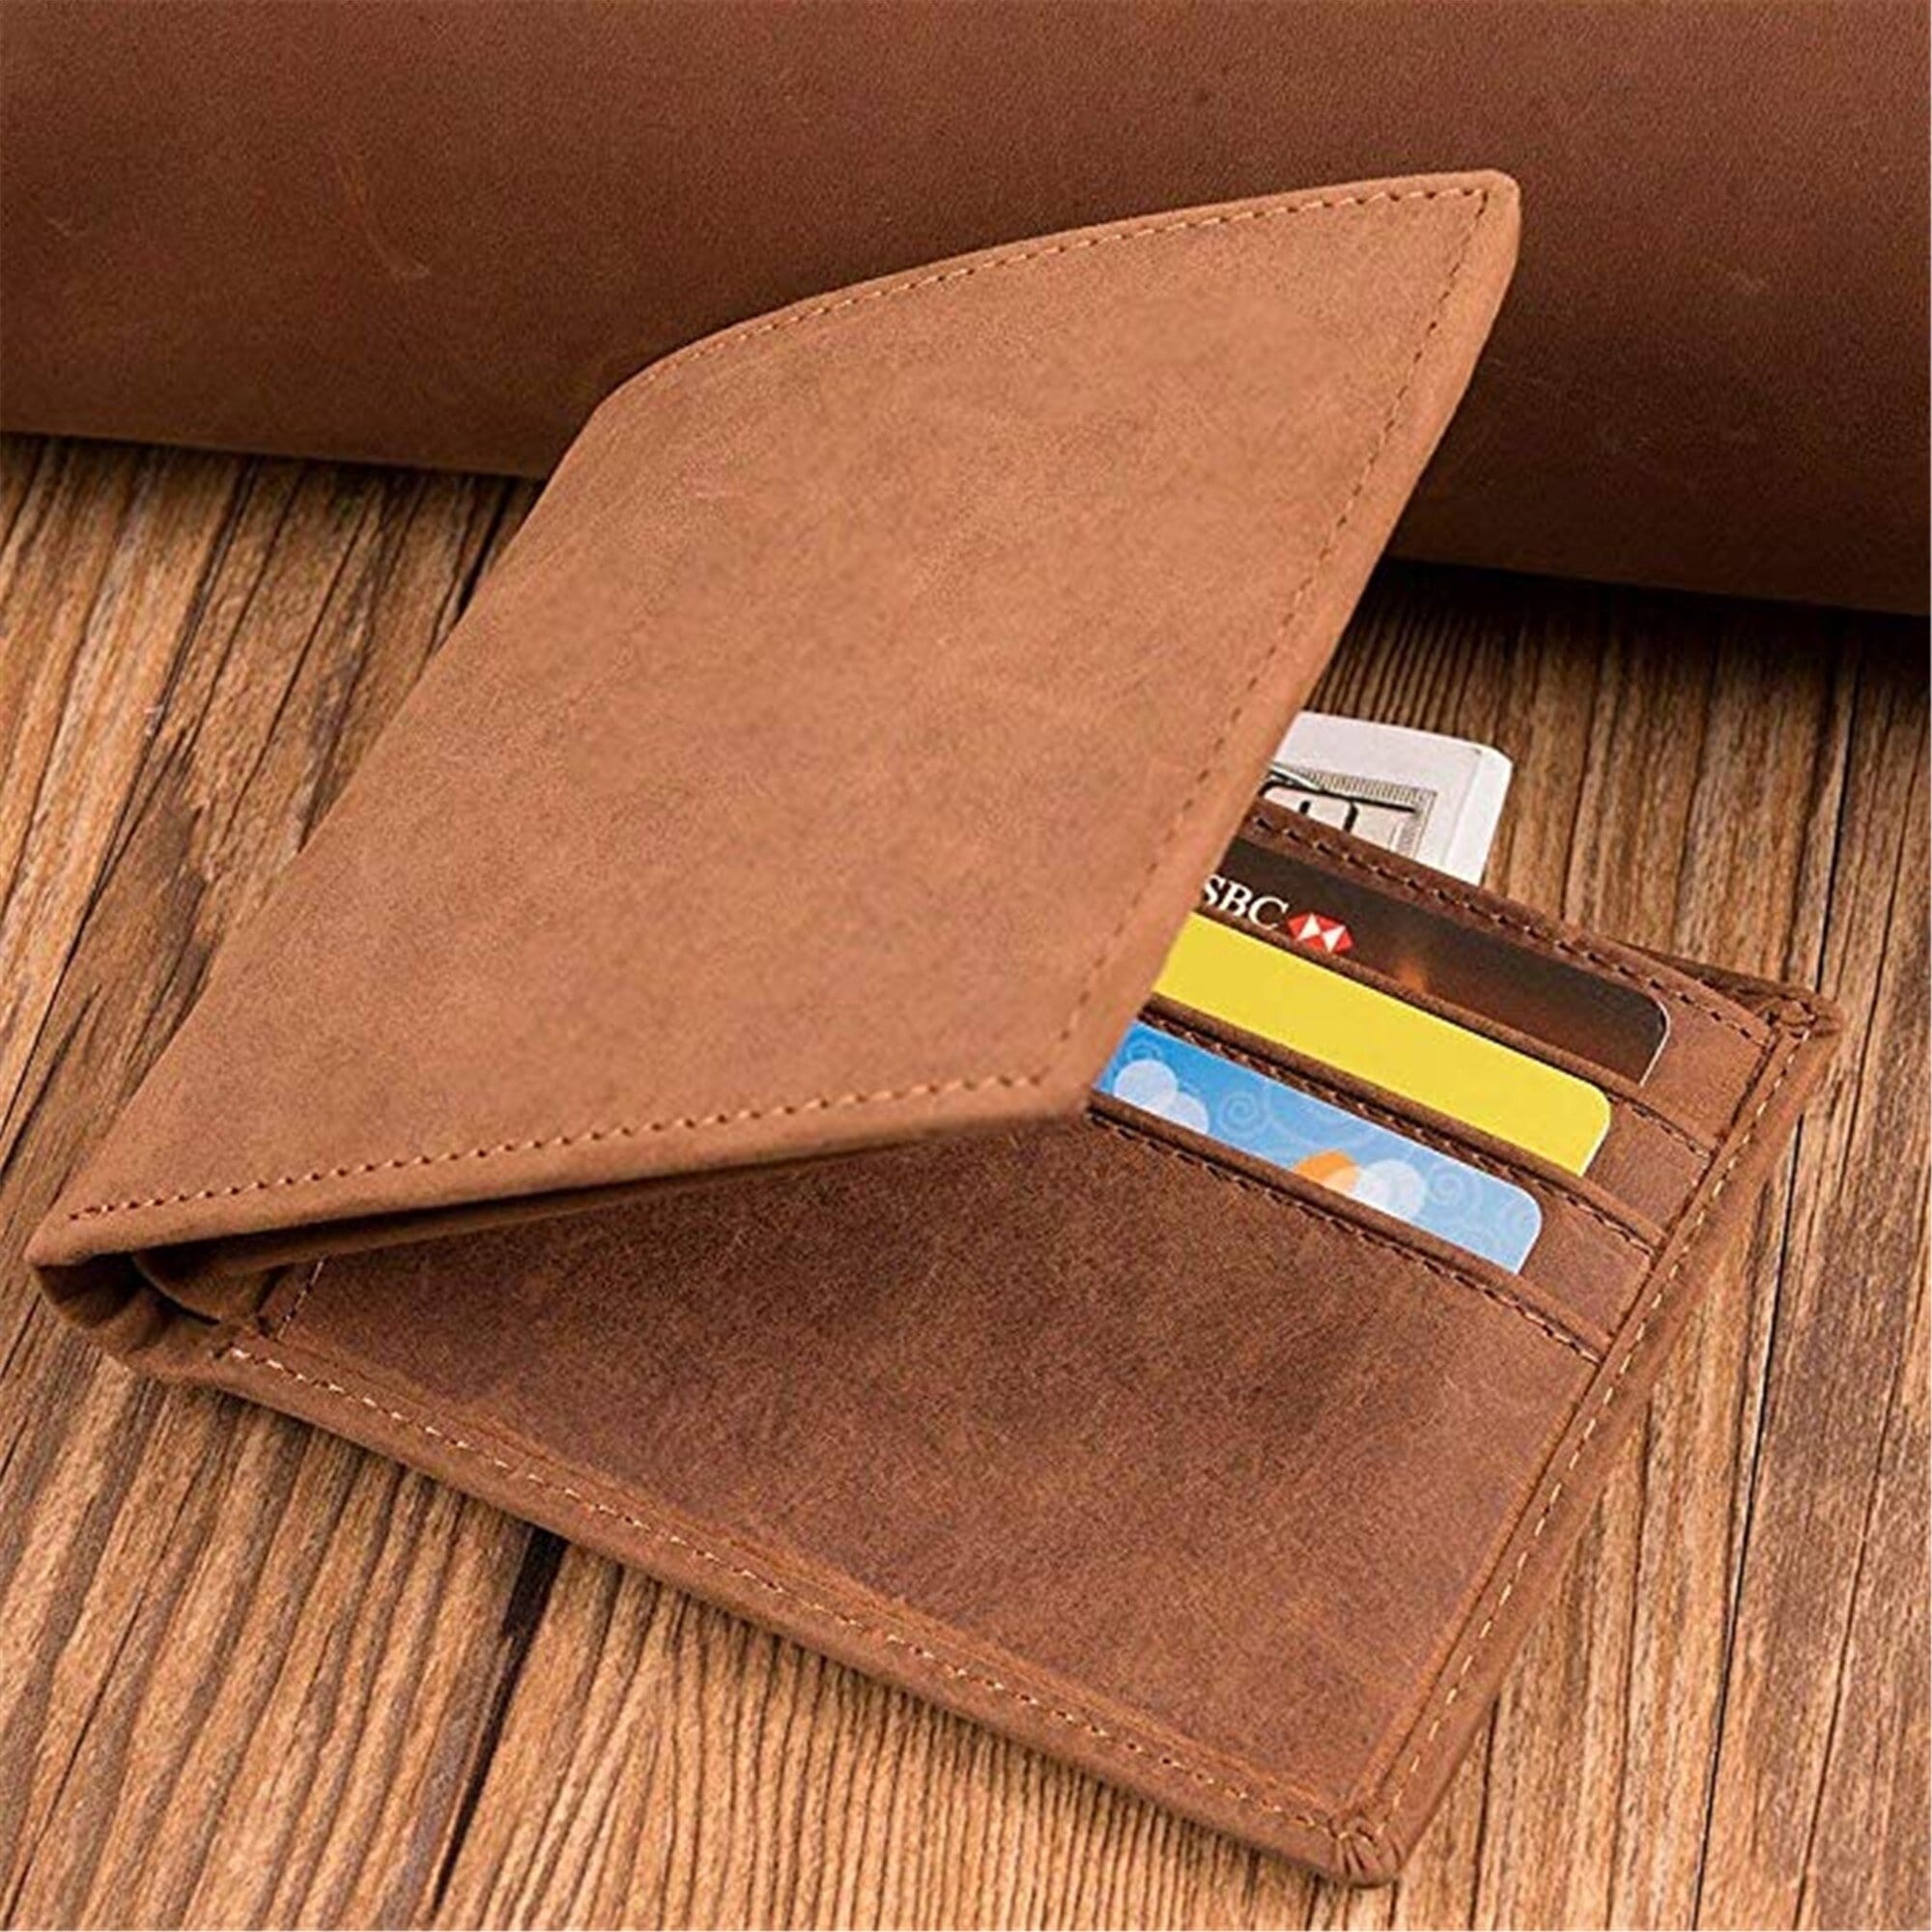 Wallets Grandpa To Grandson - I Love You Bifold Leather Wallet Gift Card GiveMe-Gifts